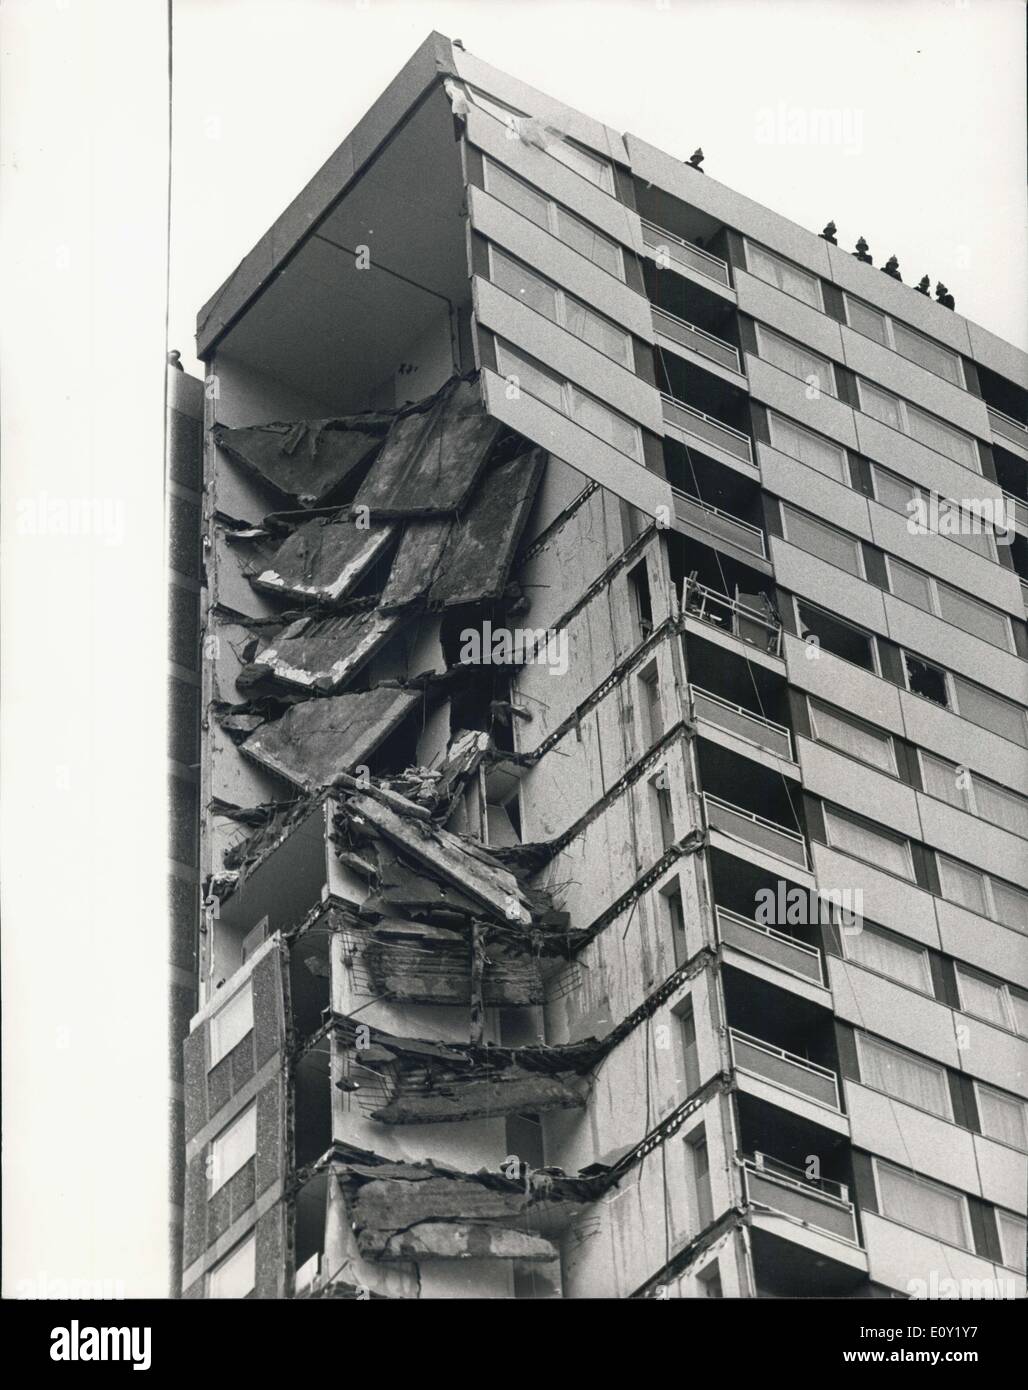 May 16, 1968 - Fifteen Feared Dead And 80 Trapped When Part of Block of Flats Collapses. 15 people are feared dead and 80 trapped in East London today, when part of a 23-storey block of flats collapsed today. Teams of police ad firemen searched the rubble in Butcher's Road, Canning Town. Reports said there had been an explosion just before the collapse of the south-east corner of the building. Keystone Photo Shows:- View showing part of the collapsed section of the block of flats. Stock Photo